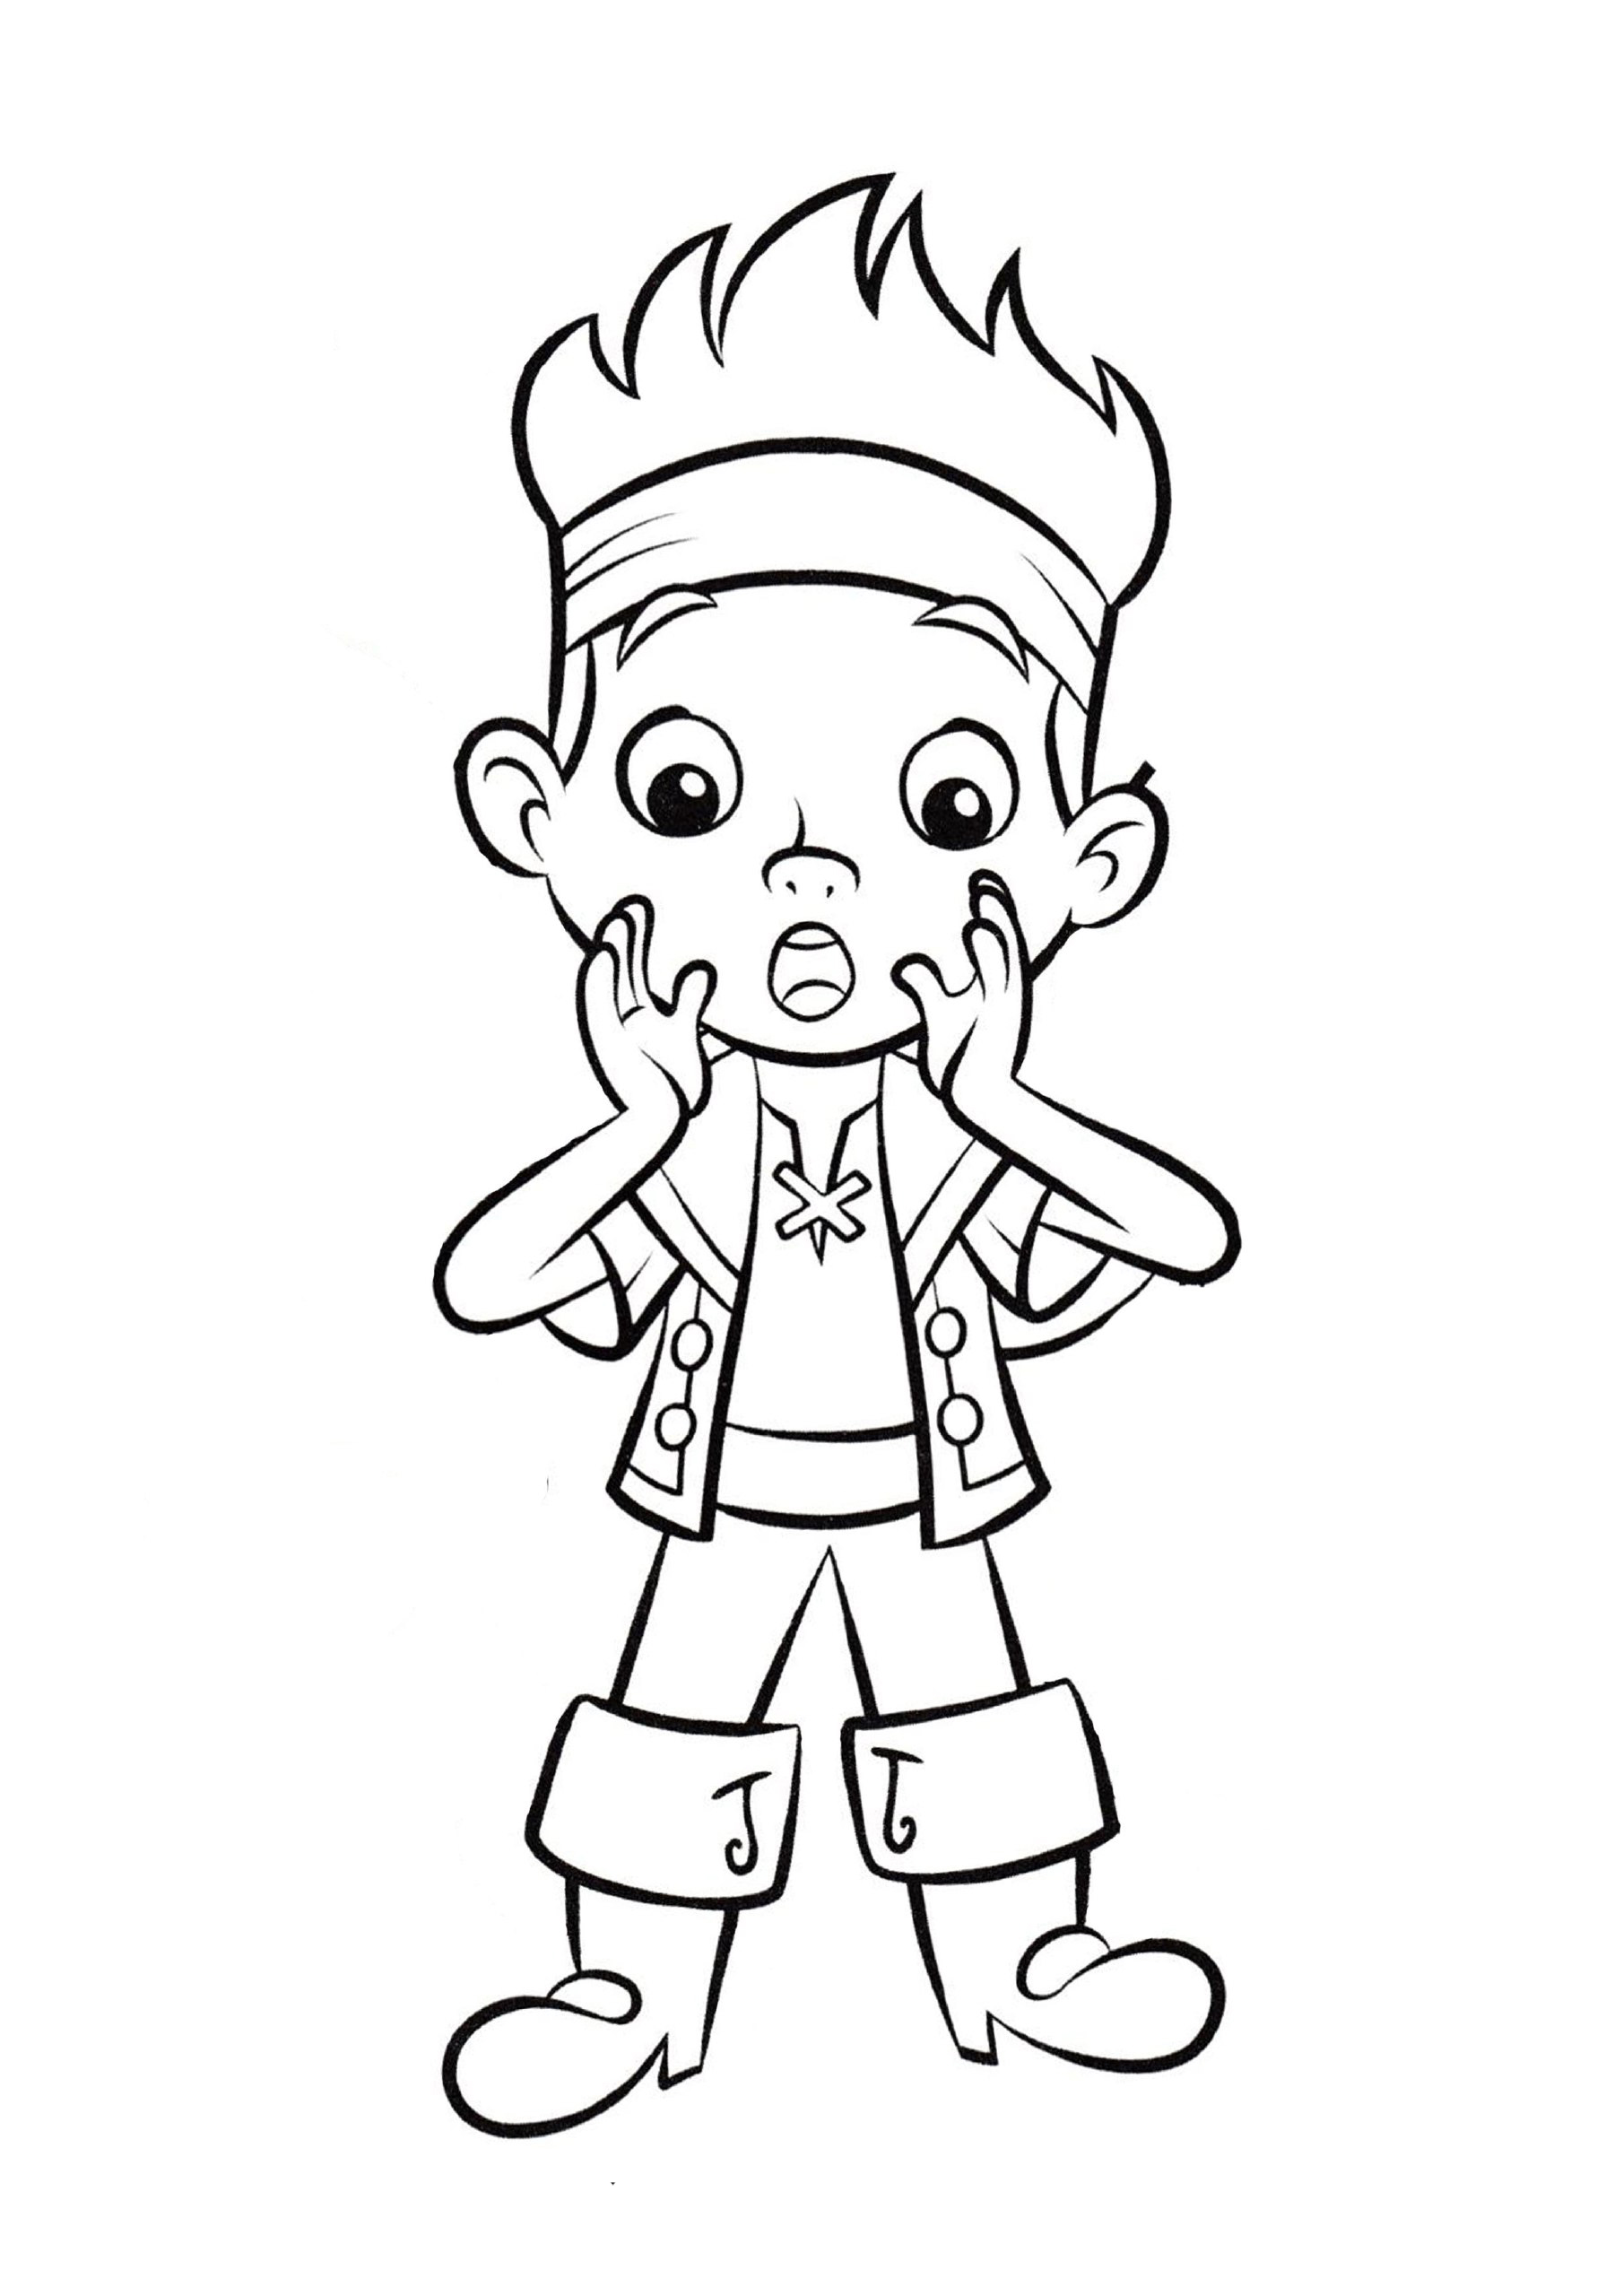 Coloring page Jake and the Never Land Pirates Pirate for boys